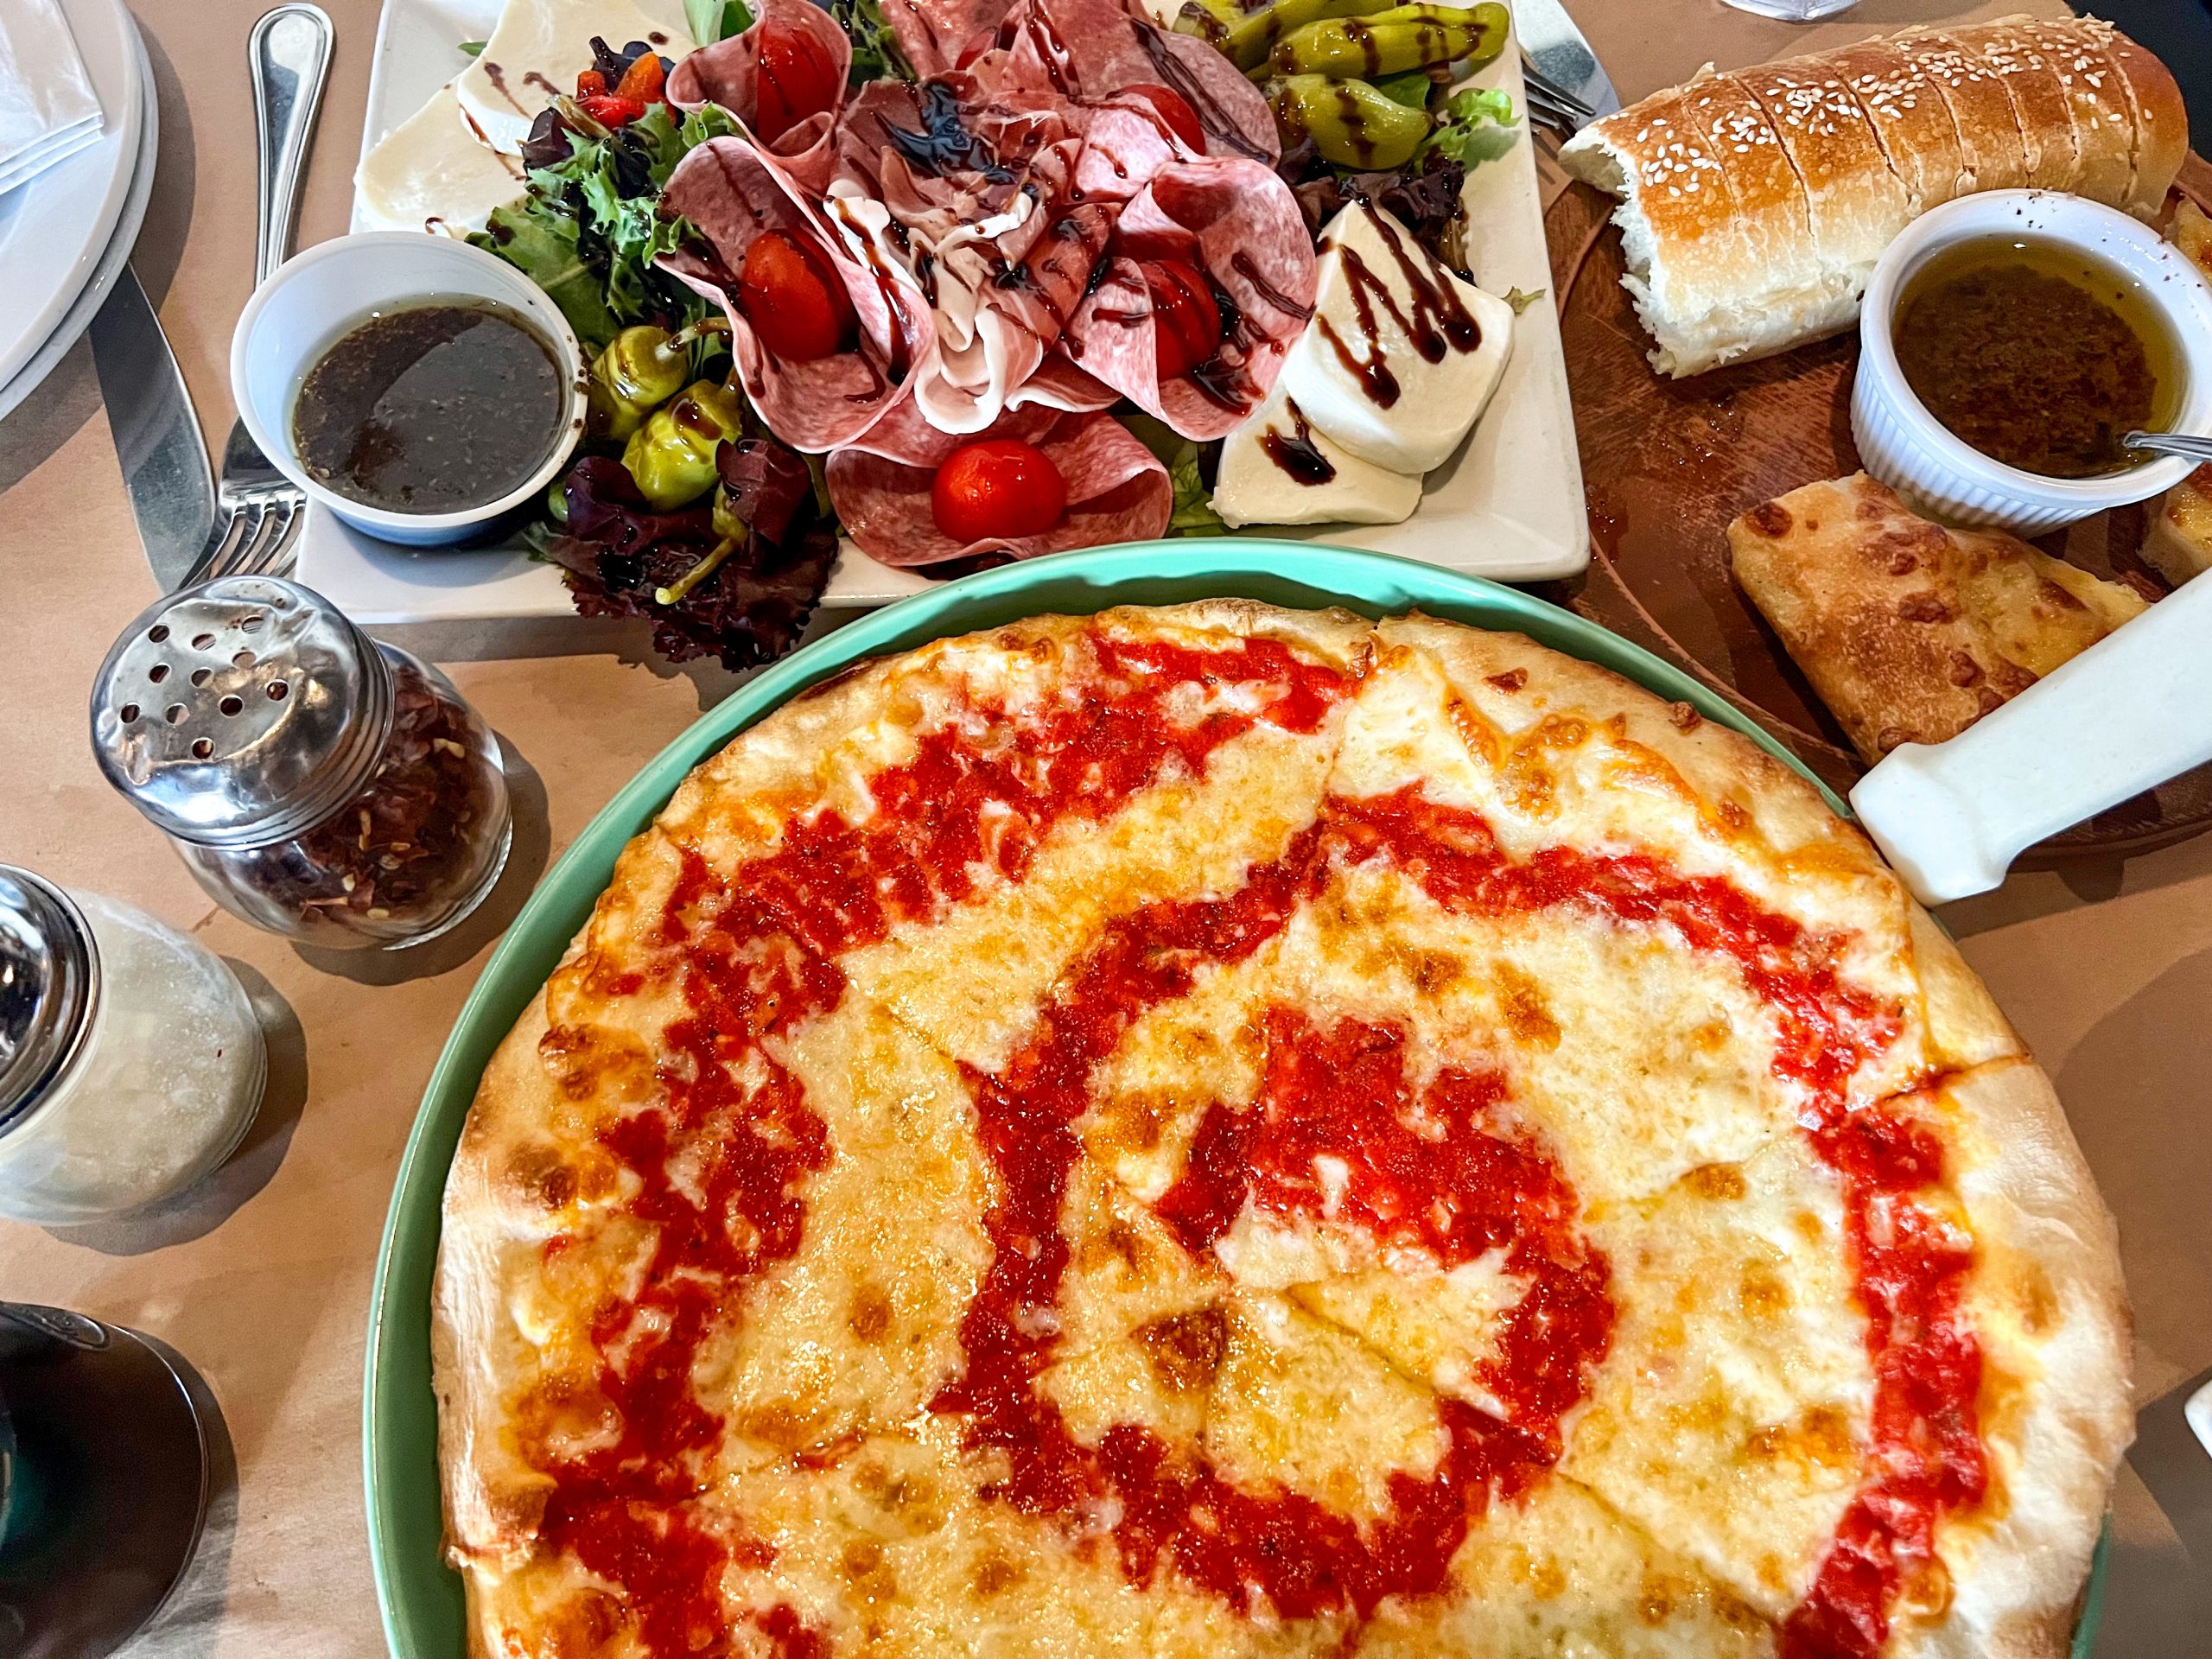 Nonna's Pizza and the Antipasto Salad with bread and olive spread